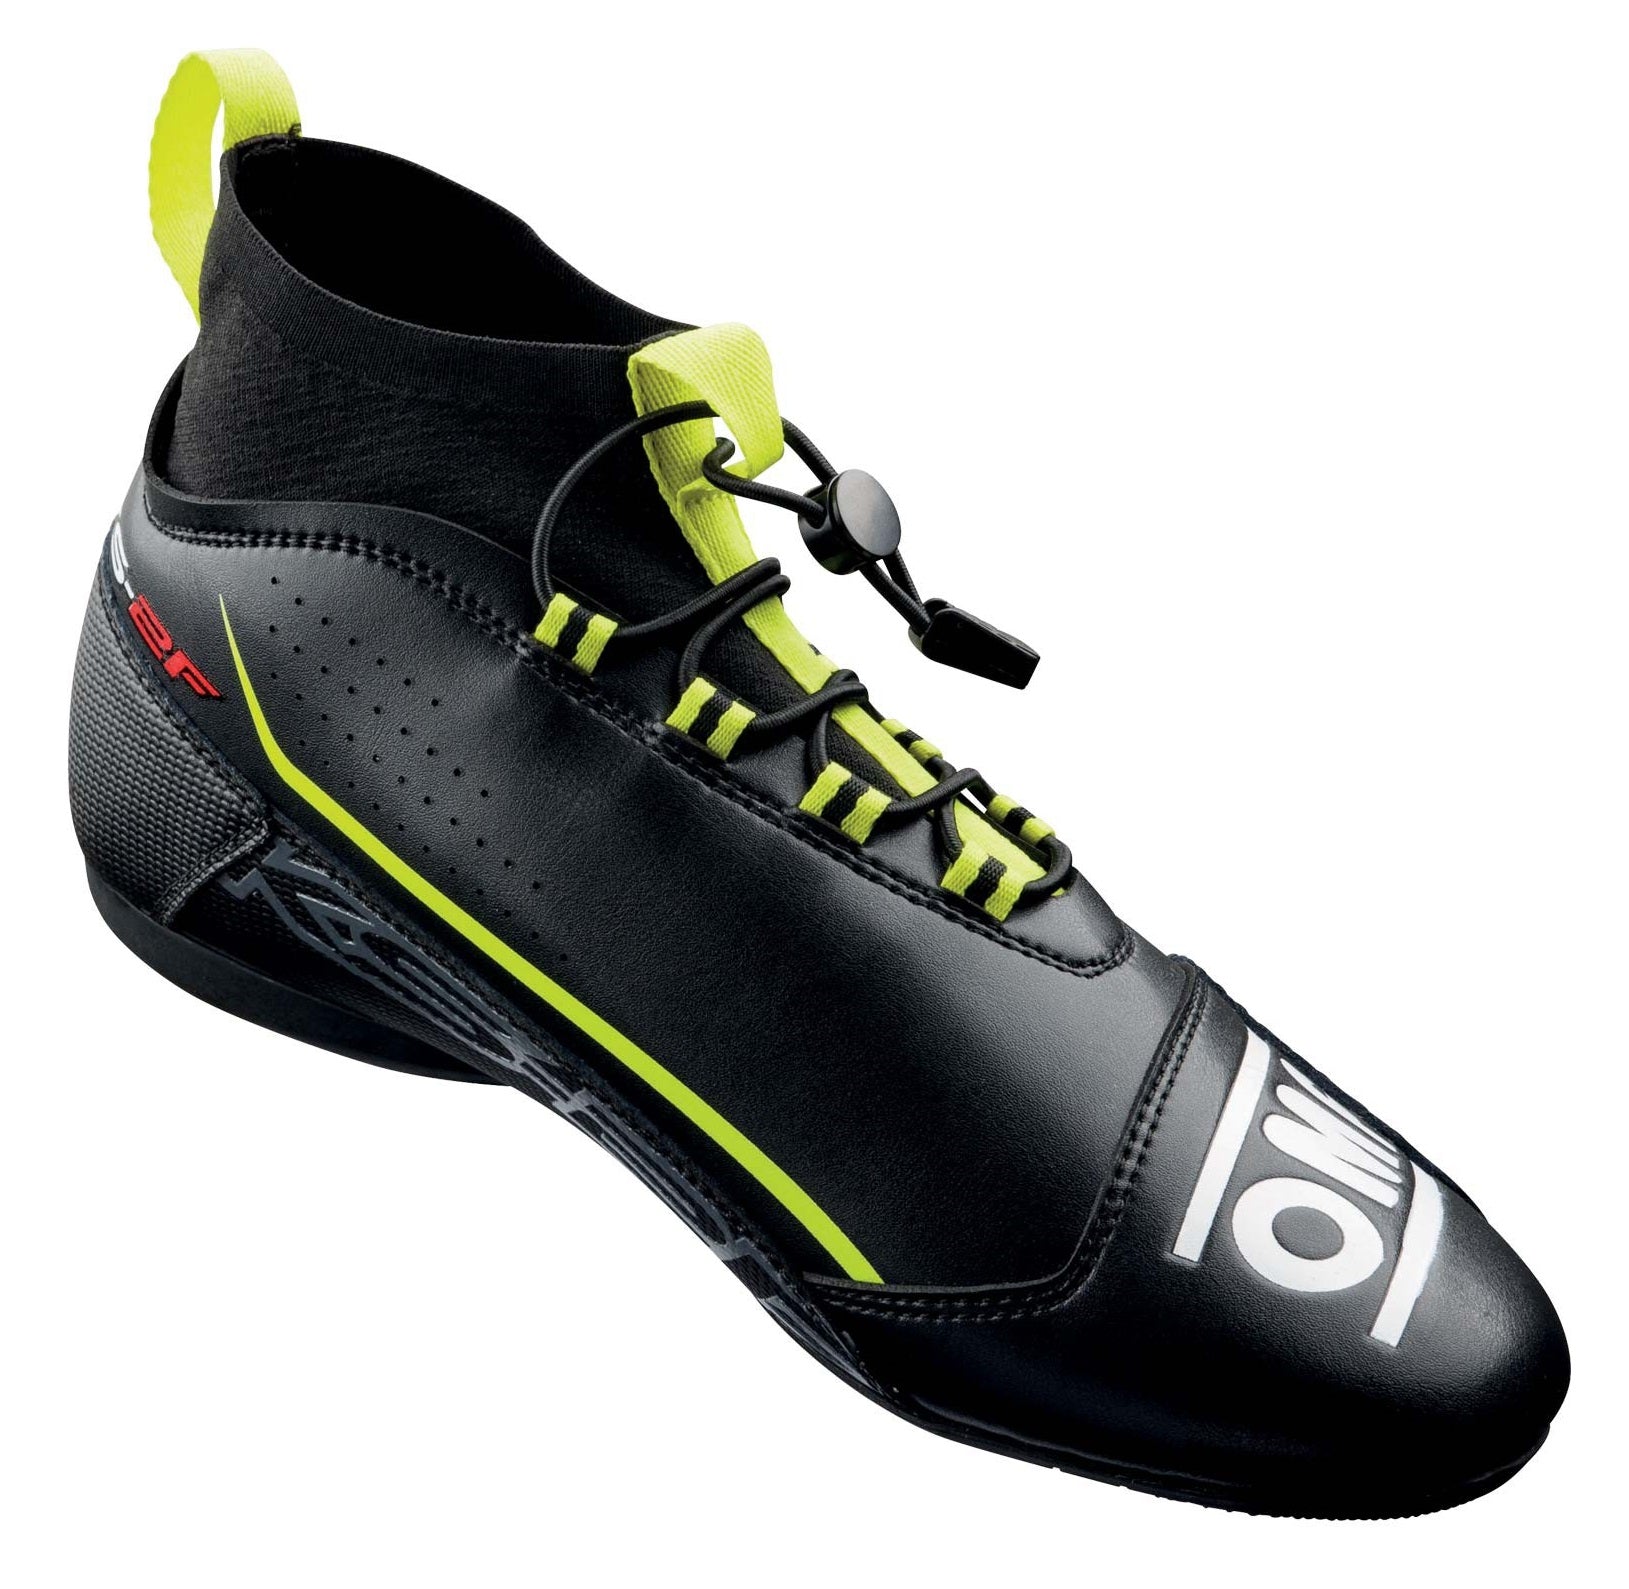 OMP KC0-0830-A01-178-46 KS-2F Karting shoes, black/fluo yellow, size 46 Photo-1 